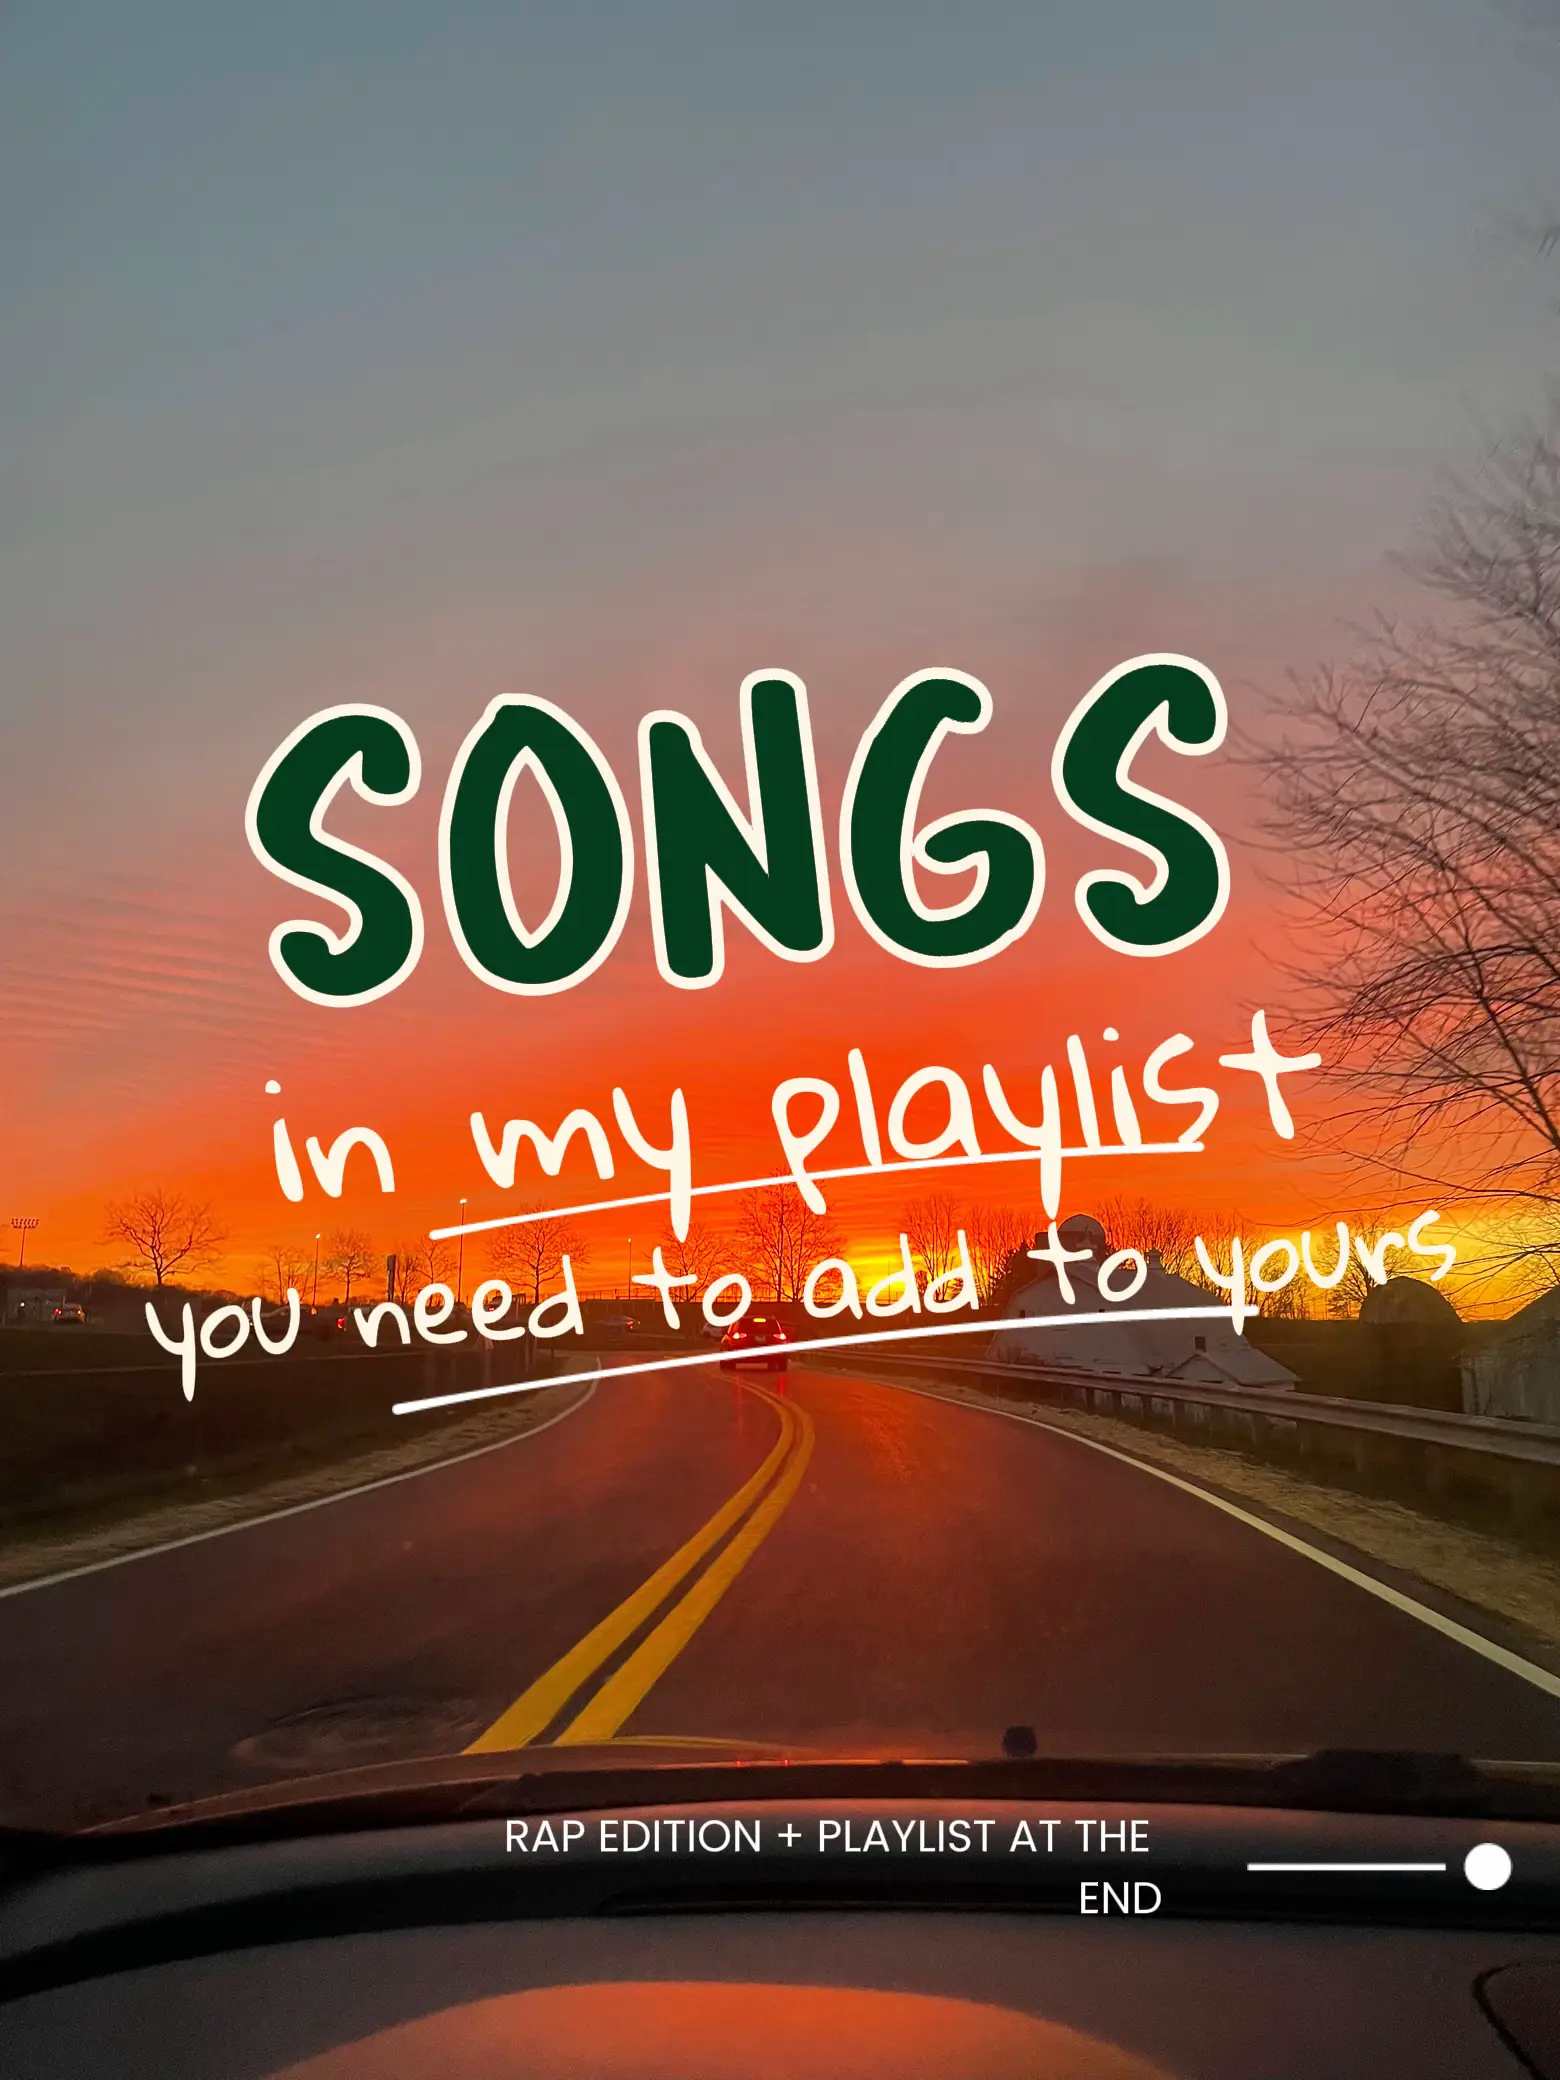 SONGS YOU NEED TO ADD TO YOUR PLAYLIST's images